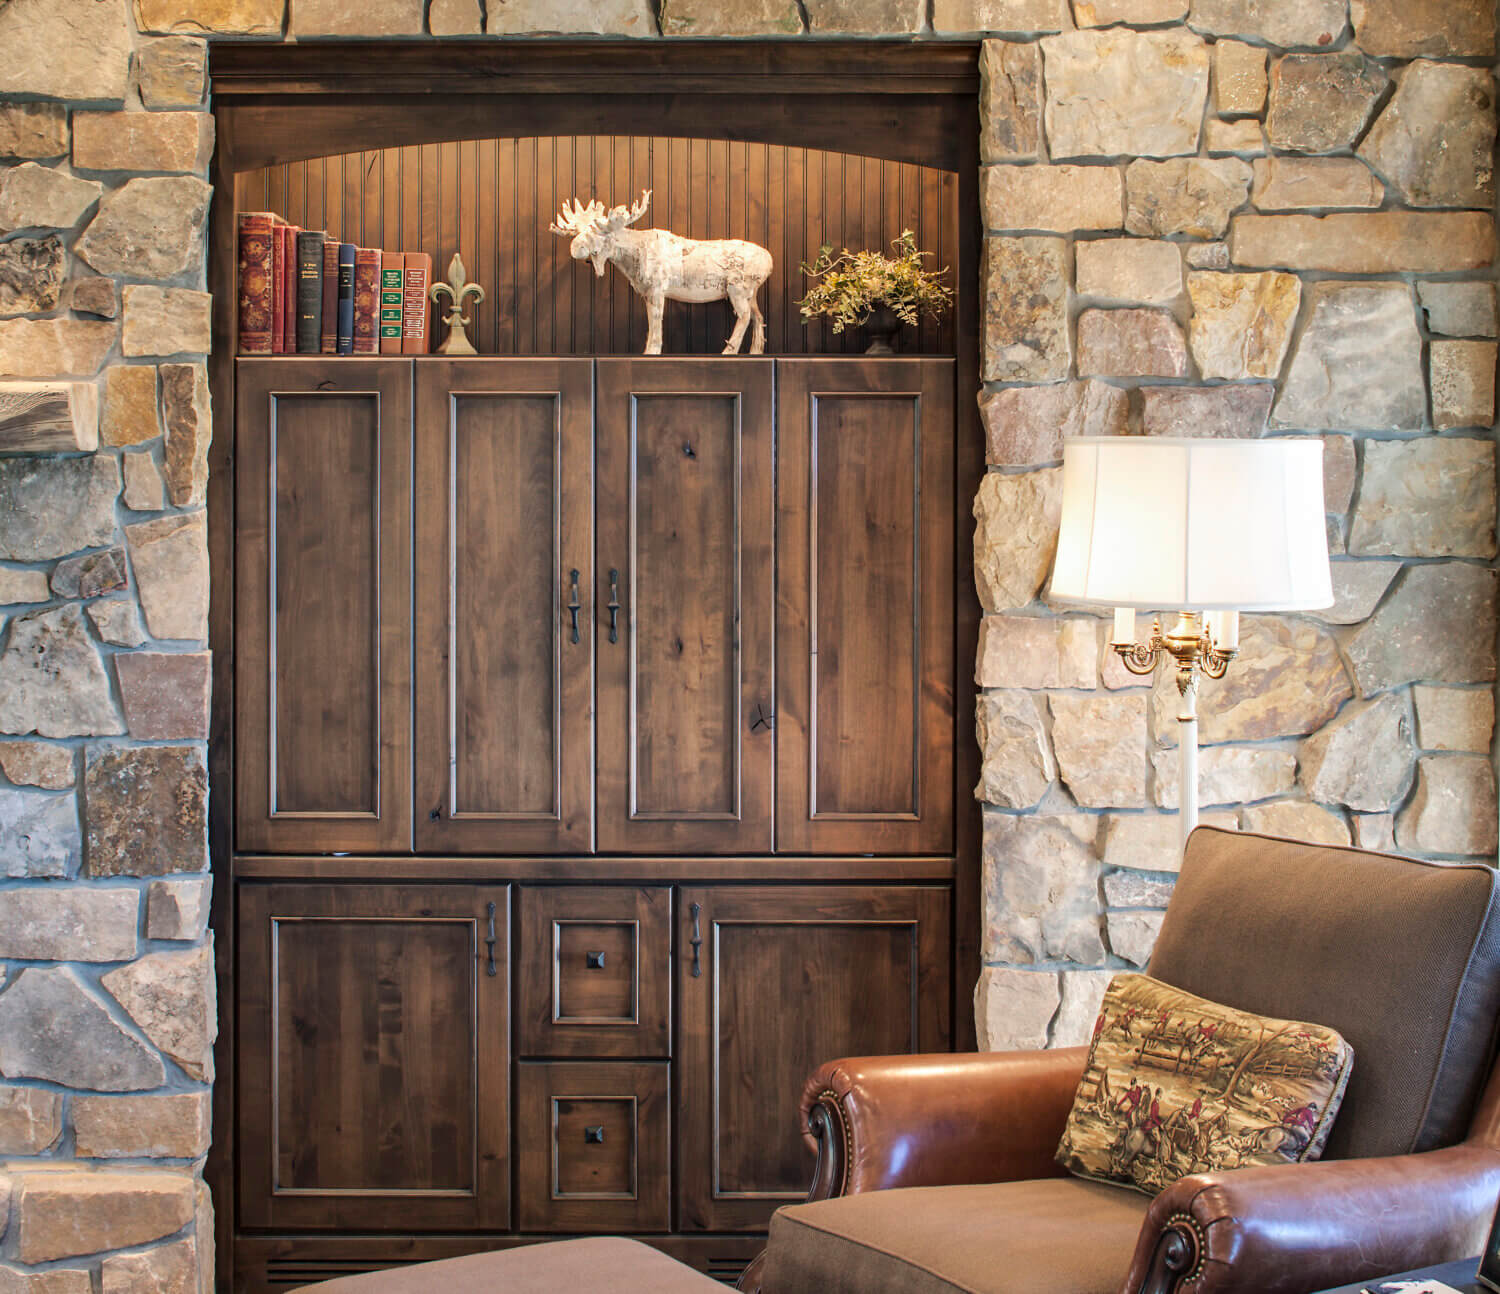 A built-in entertainment center surrounded by a decorative rock wall in a rustic living room design.